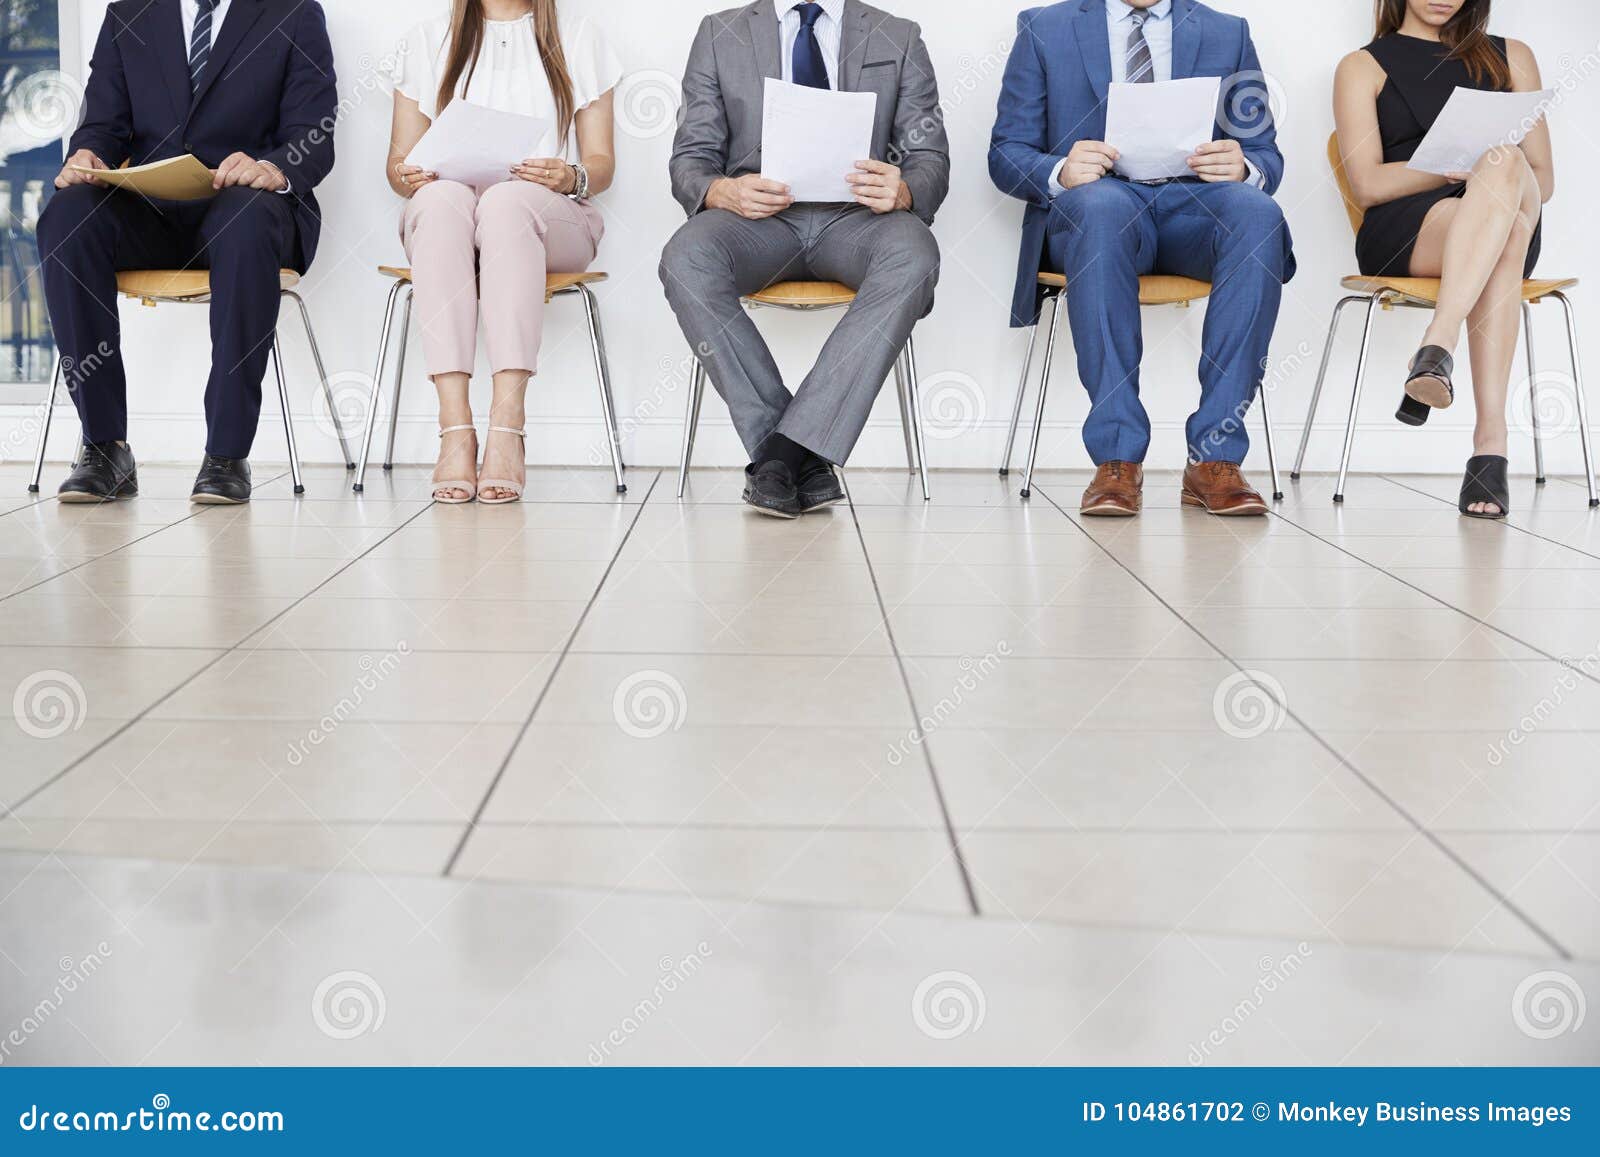 five candidates waiting for job interviews, front view, crop